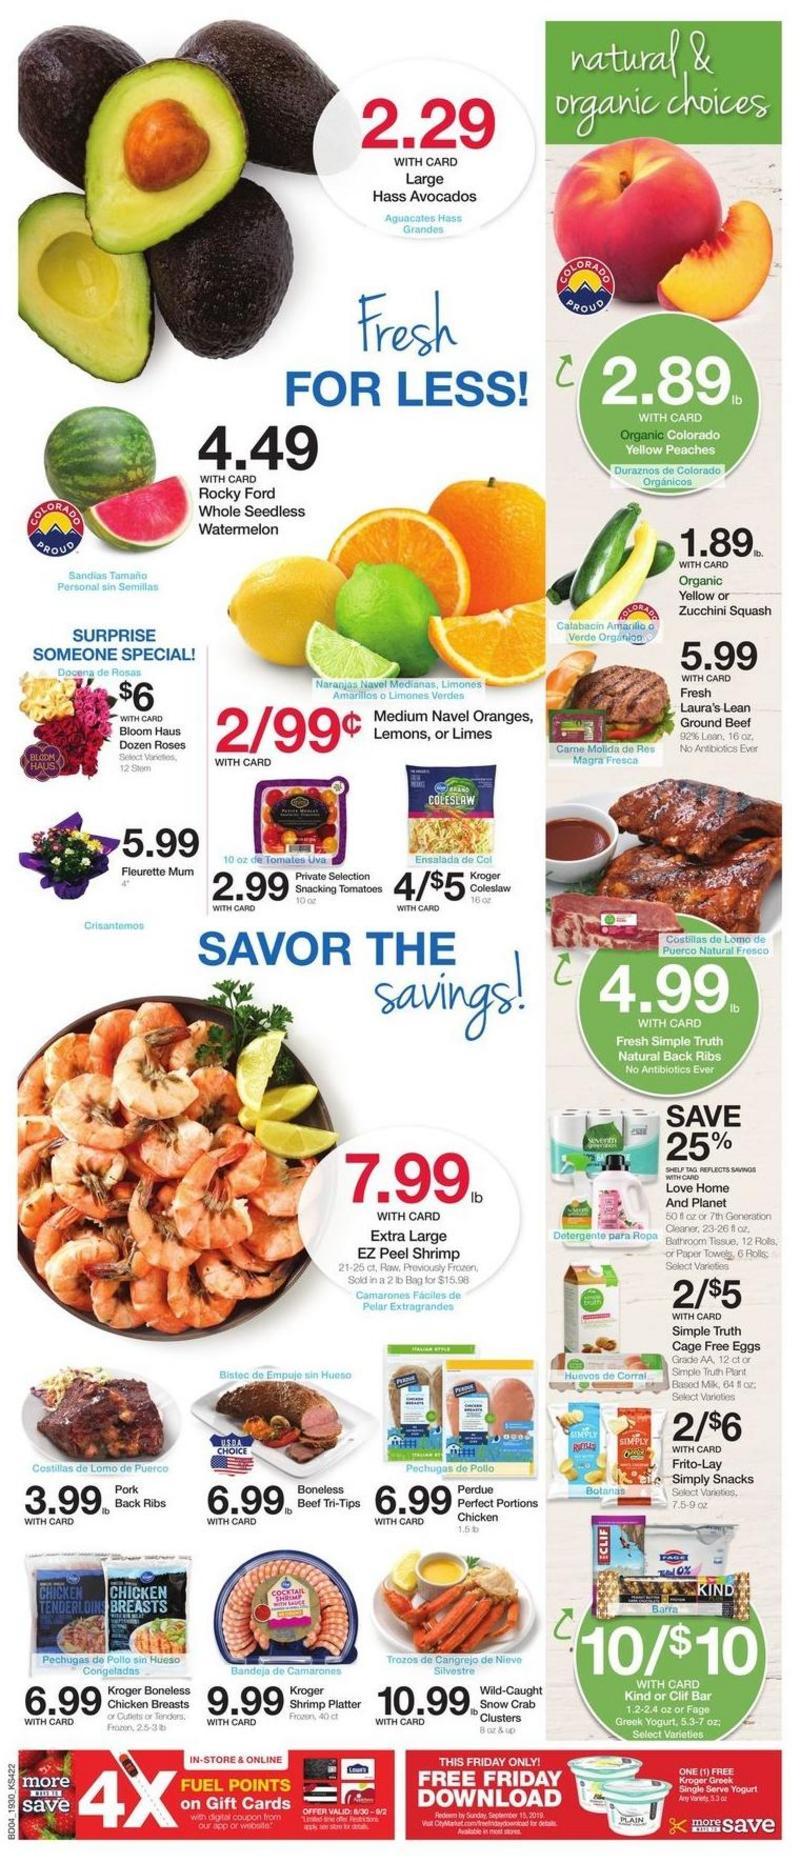 City Market Weekly Ad from August 28